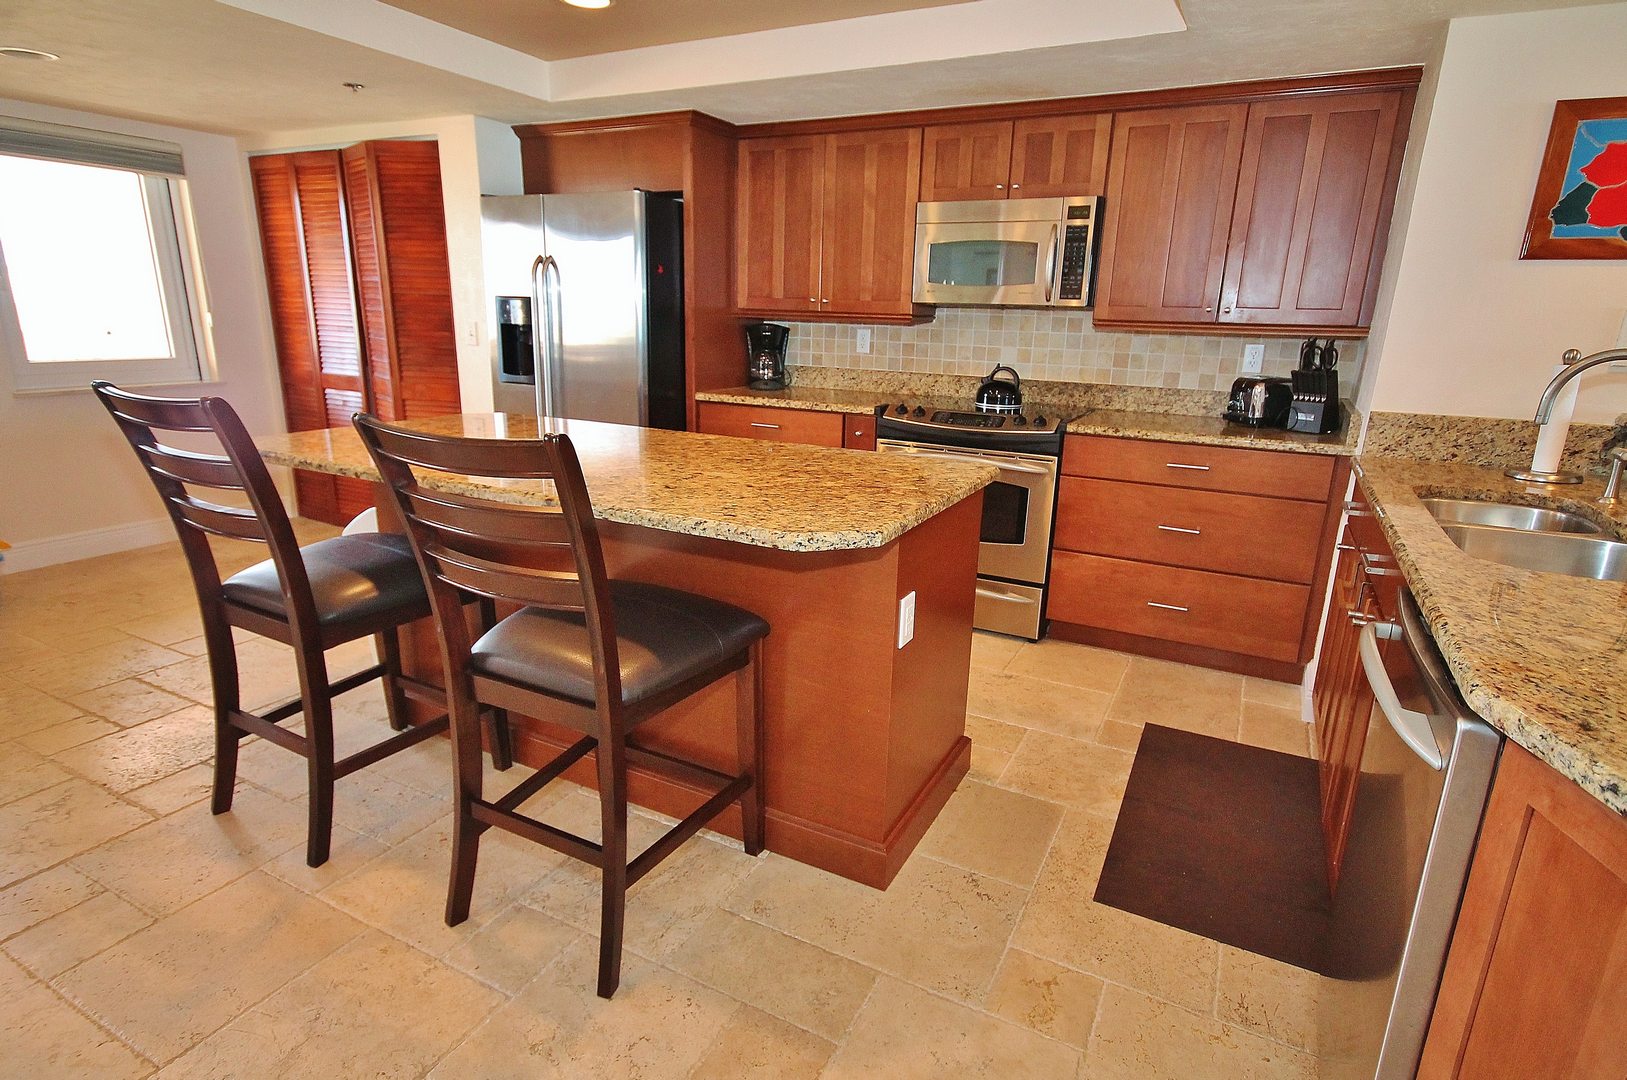 Kitchen with an Island